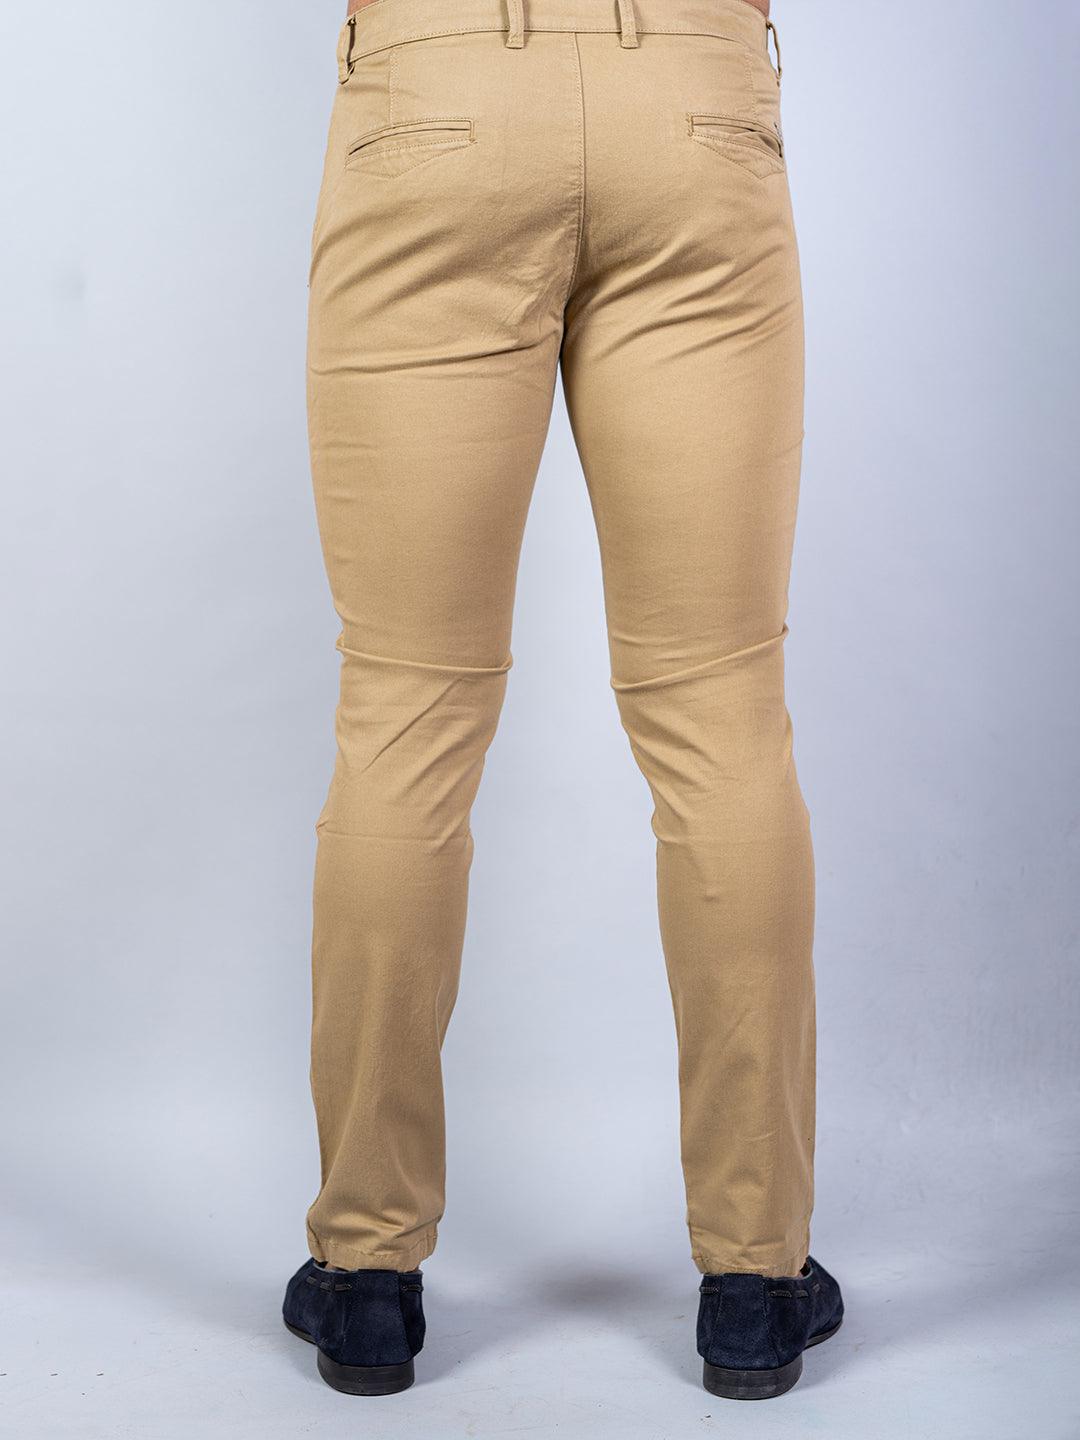 Buy Allen Solly Trousers Online At Best Price Offers In India